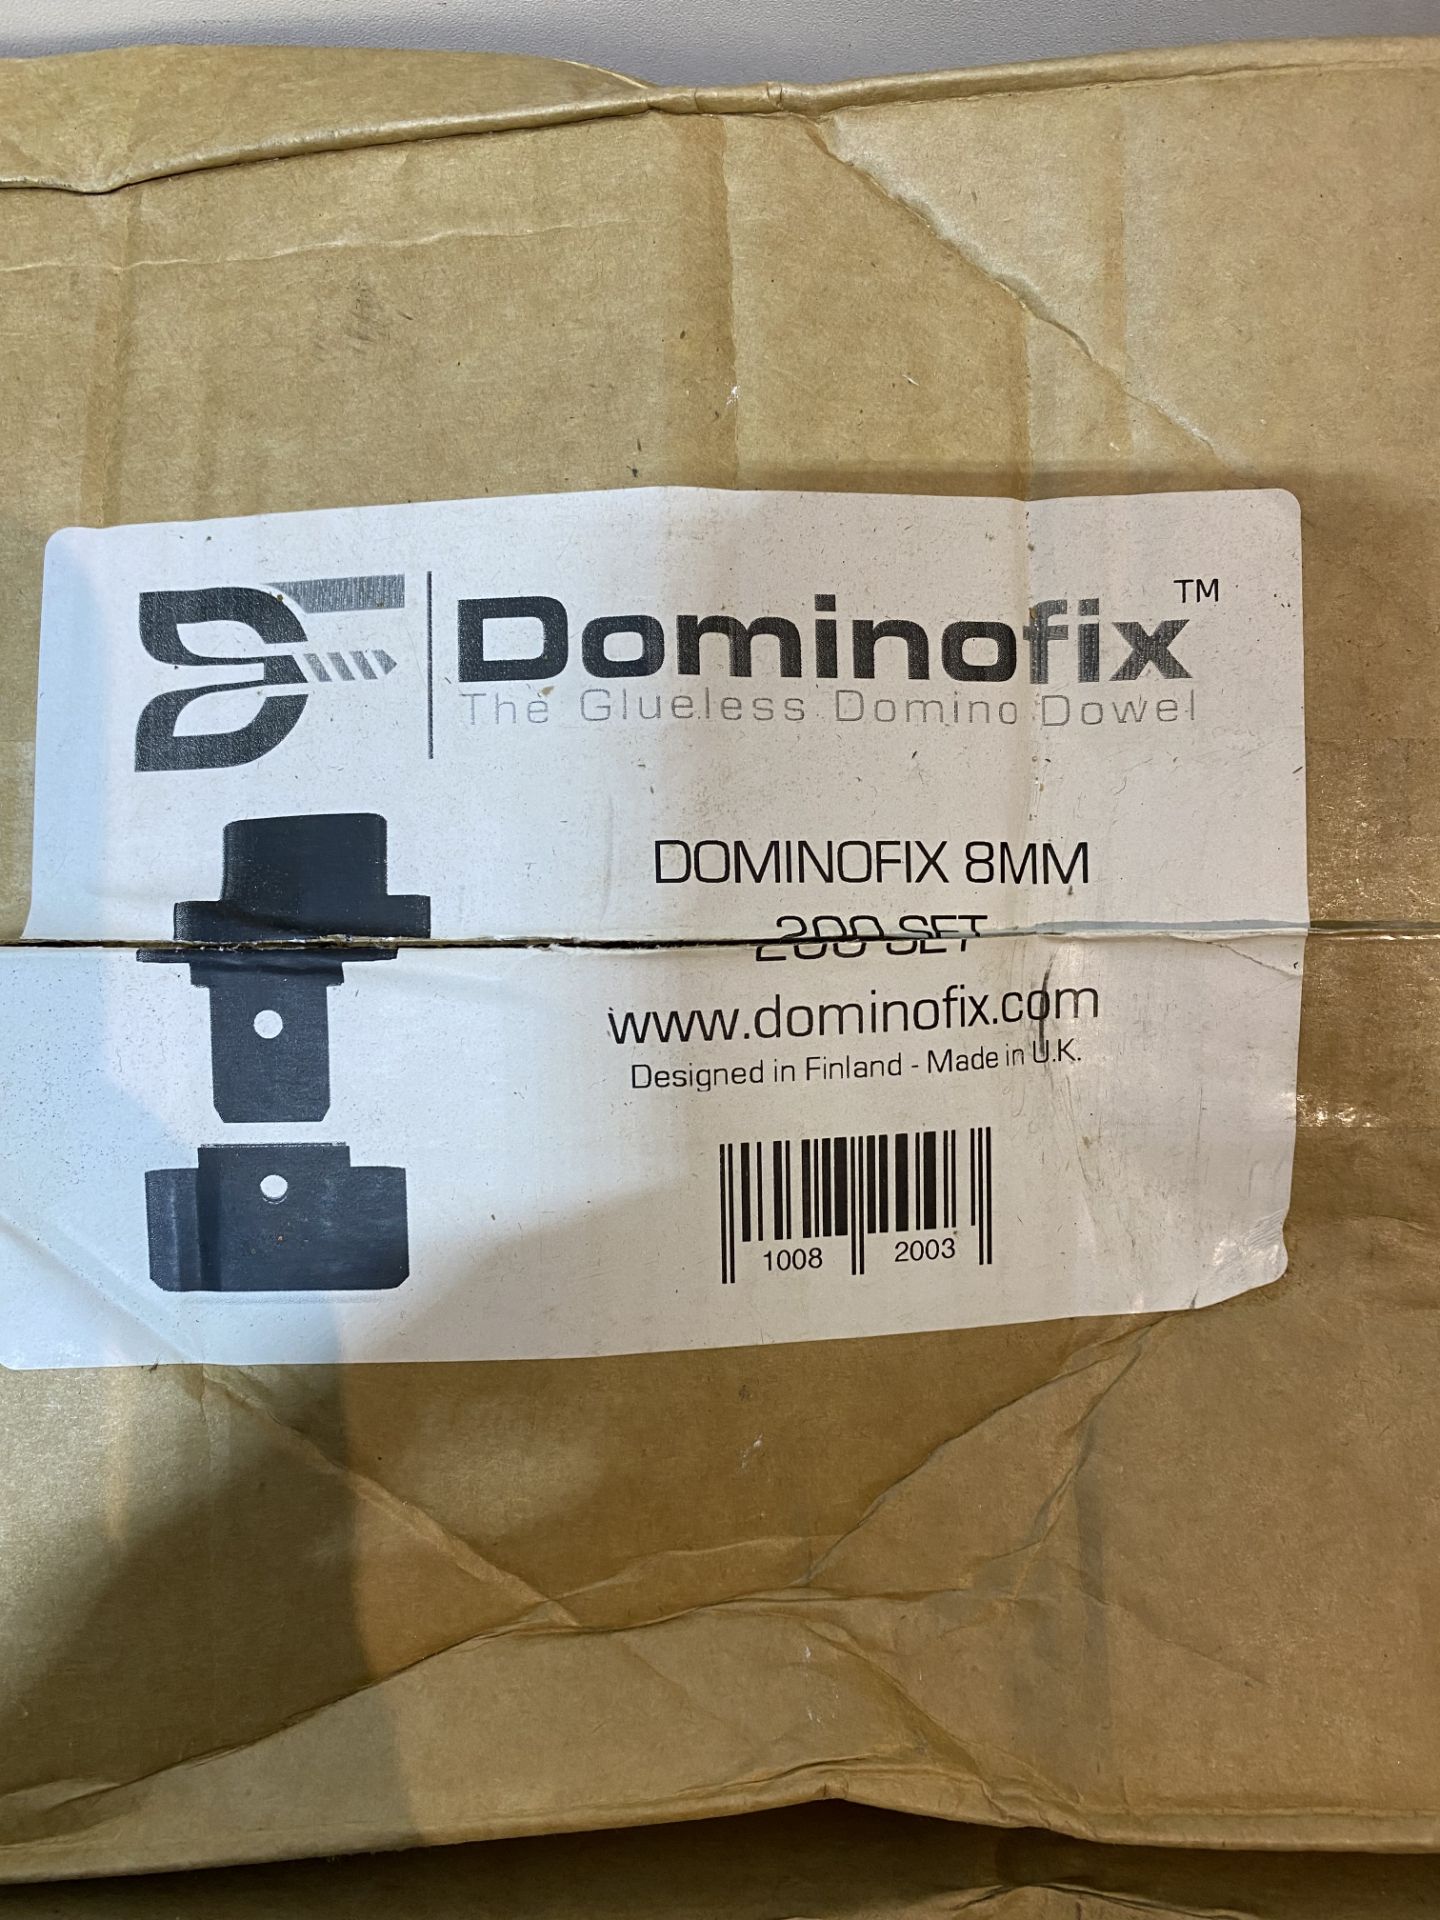 Approximately 3500 x 10mm & 8mm Dominofix Domino Tenons For Festool Domino DF-500 ( Or Alternative R - Image 4 of 5